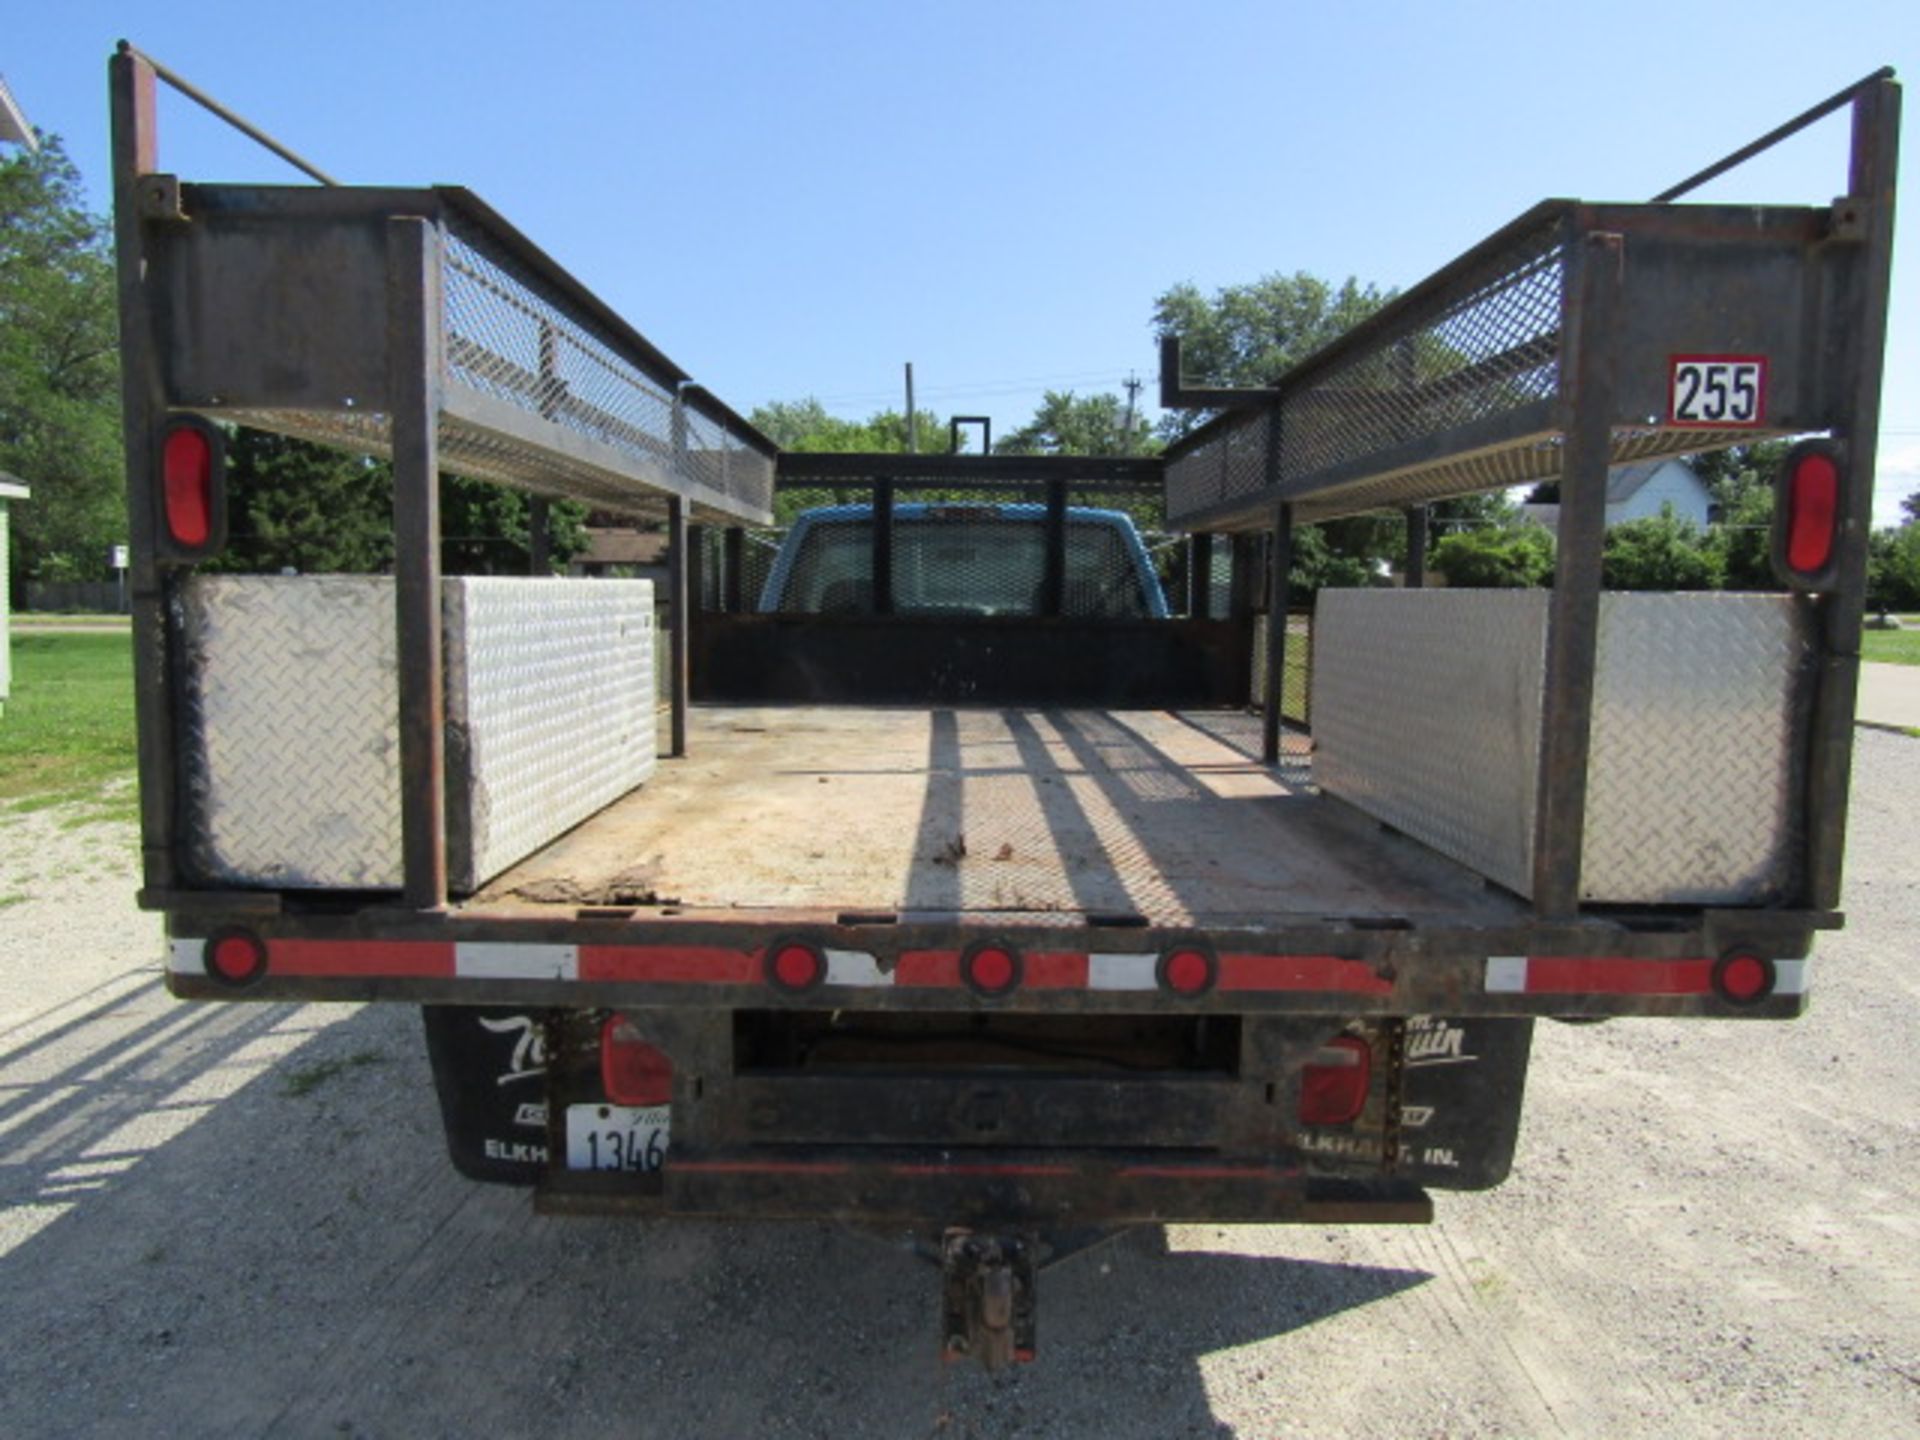 1999 Chevy 3500 Form Pick Up w/Tool Boxes, 9' Bed, Model GMT-400, Dually, VIN #1GBJC34J0XF063255, - Image 18 of 27